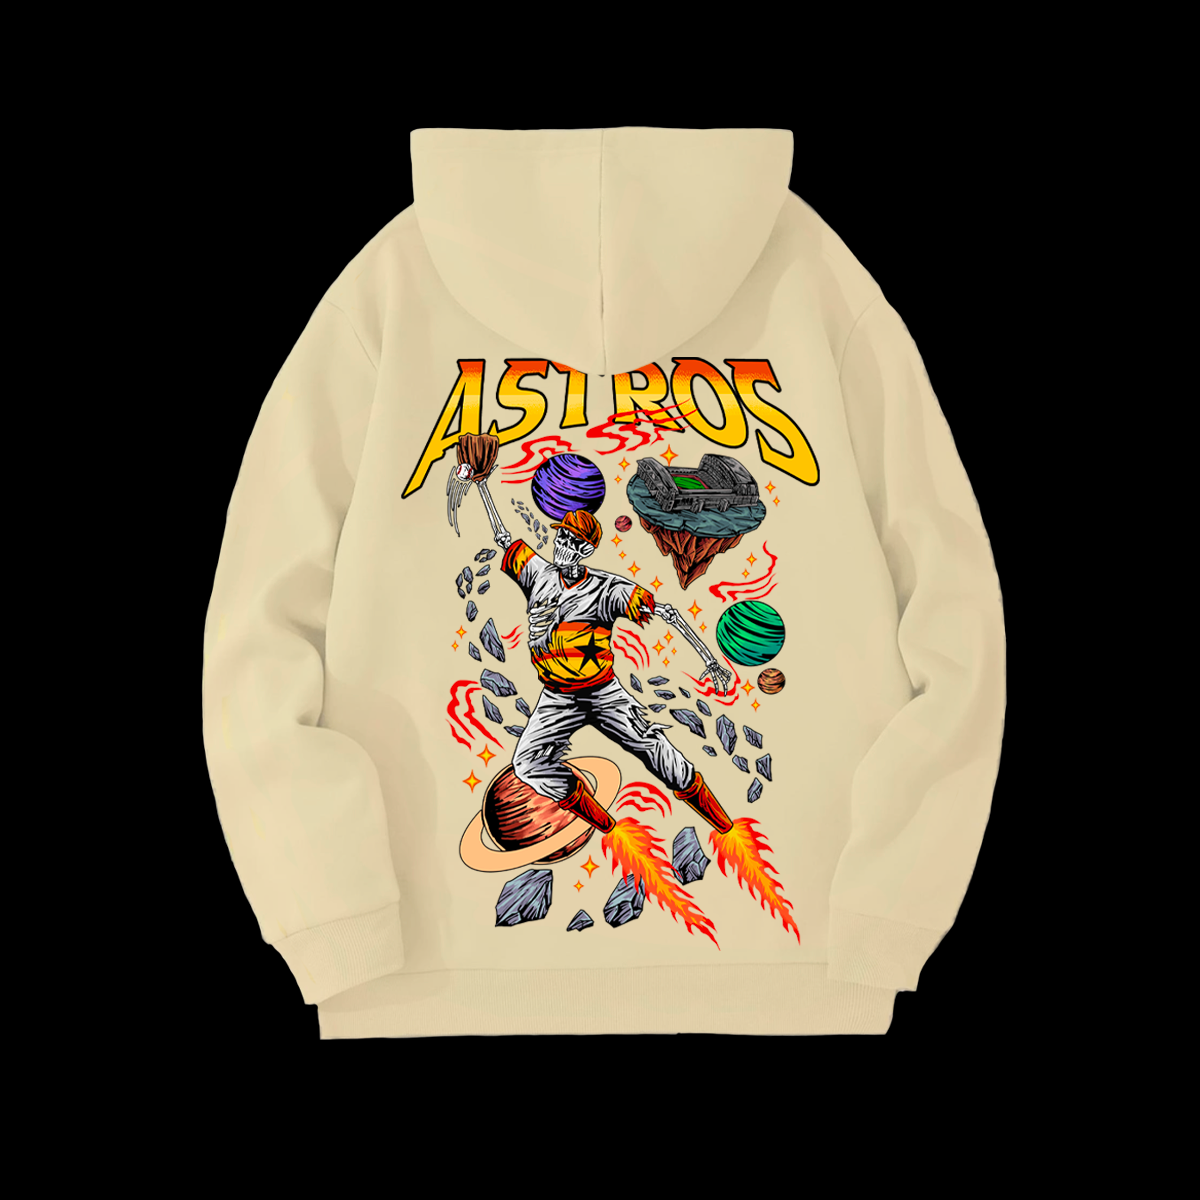 INCARNAPE ASTROS "READY2REIGN" PULL-OVER HOODIE